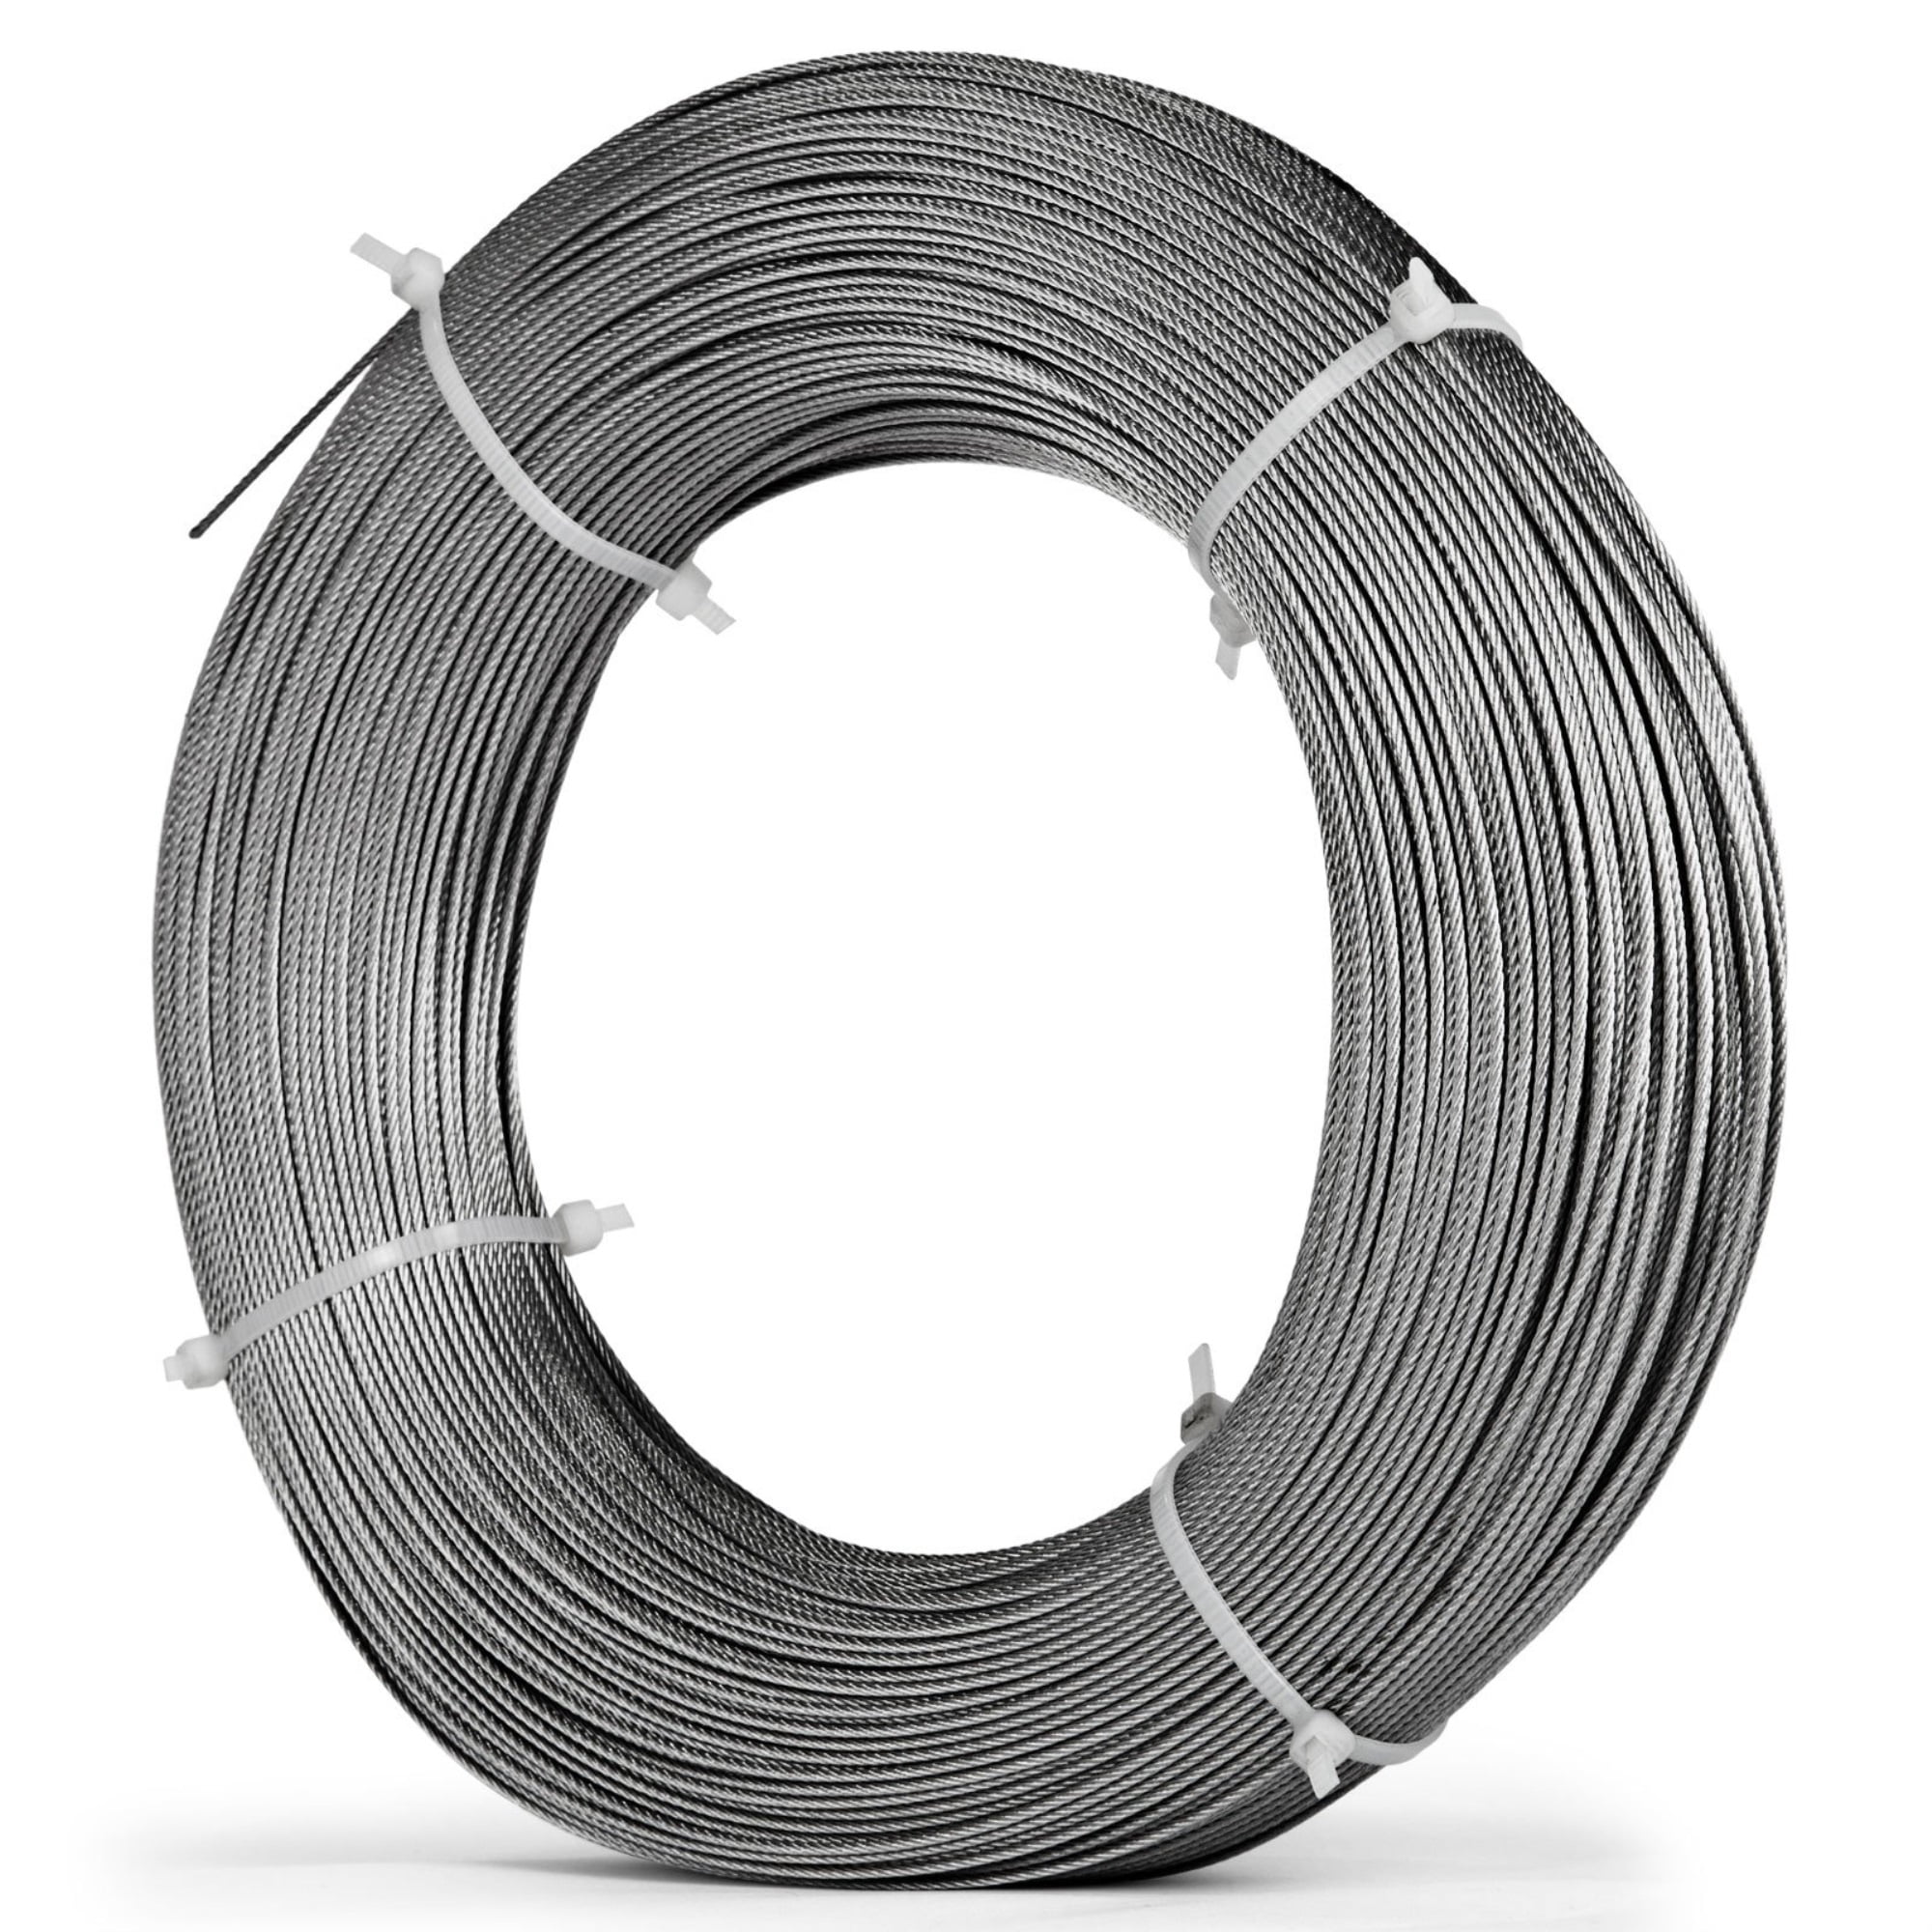 T316 Stainless Steel Cable Wire Rope,1/8",7x7,300ft Petroleum Lifting Aircraft 